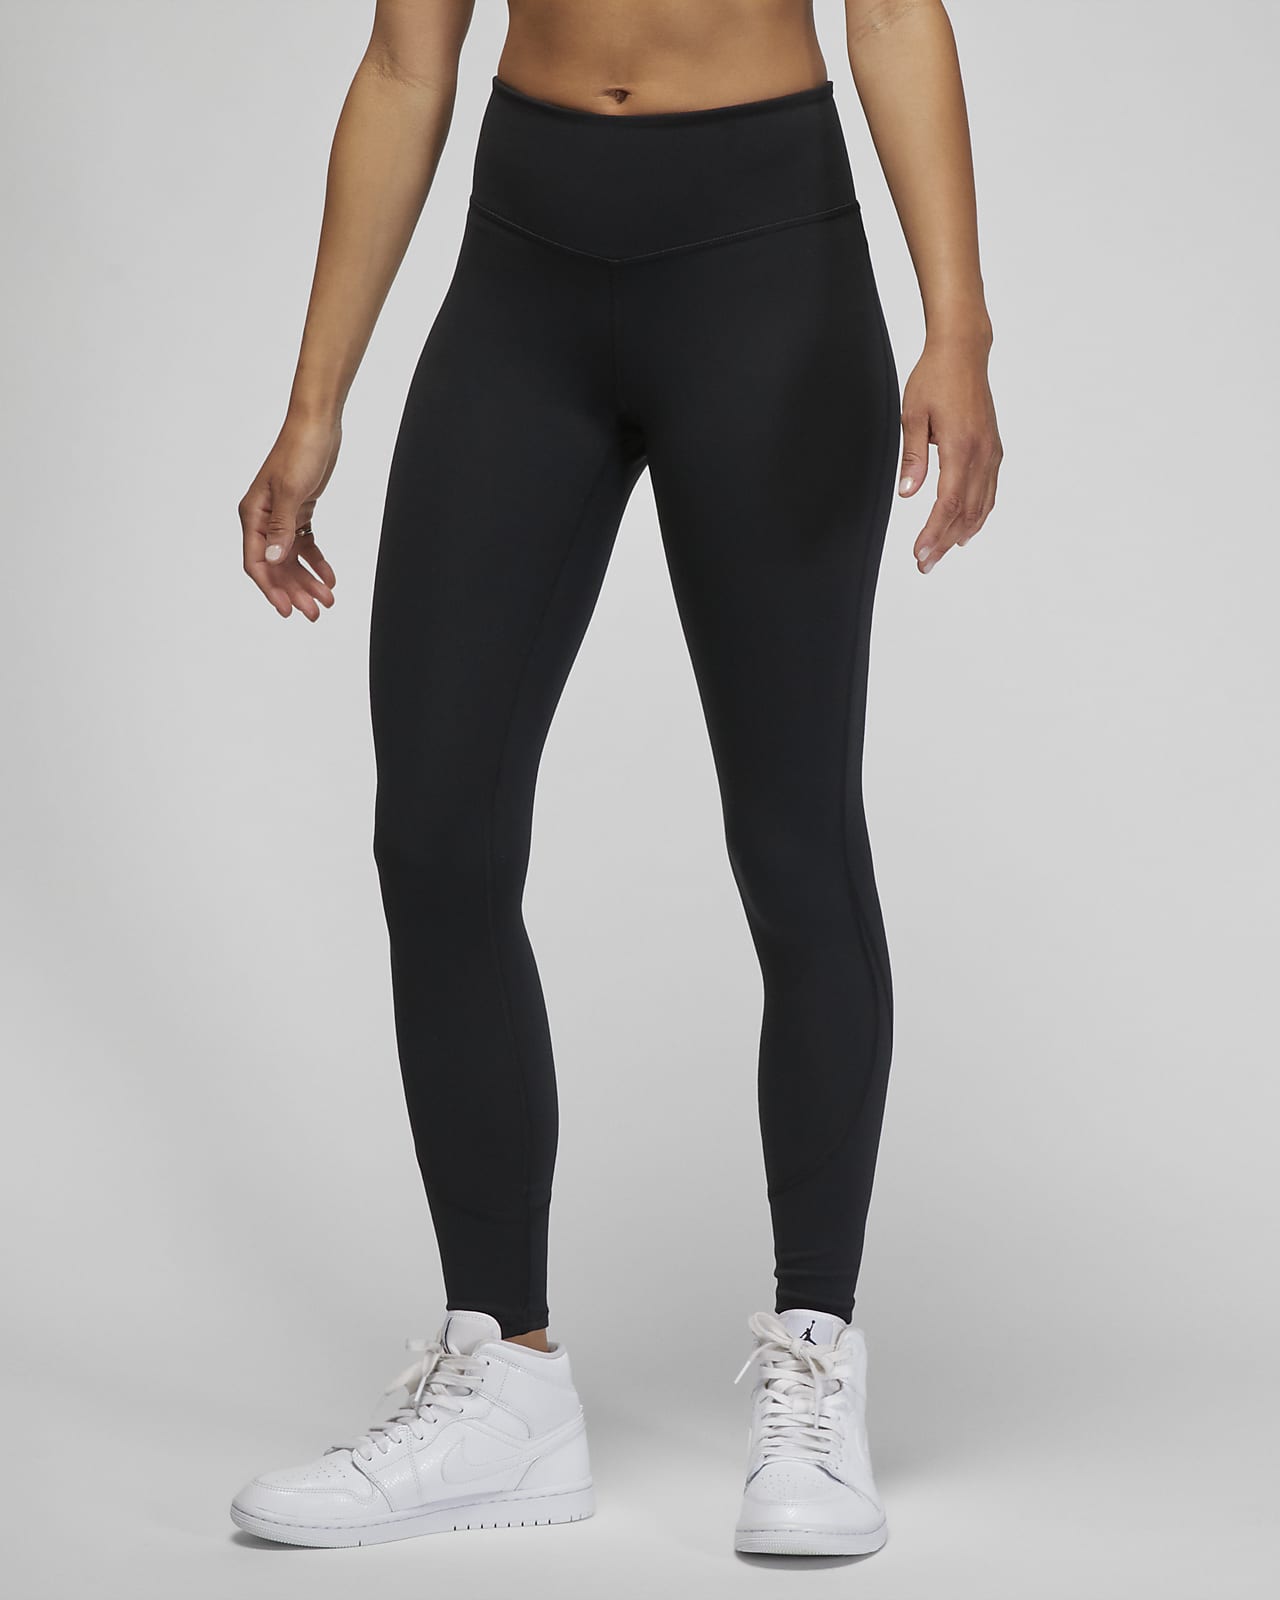 Tuff Athletics Womens High Waisted Legging With Pockets, 54% OFF